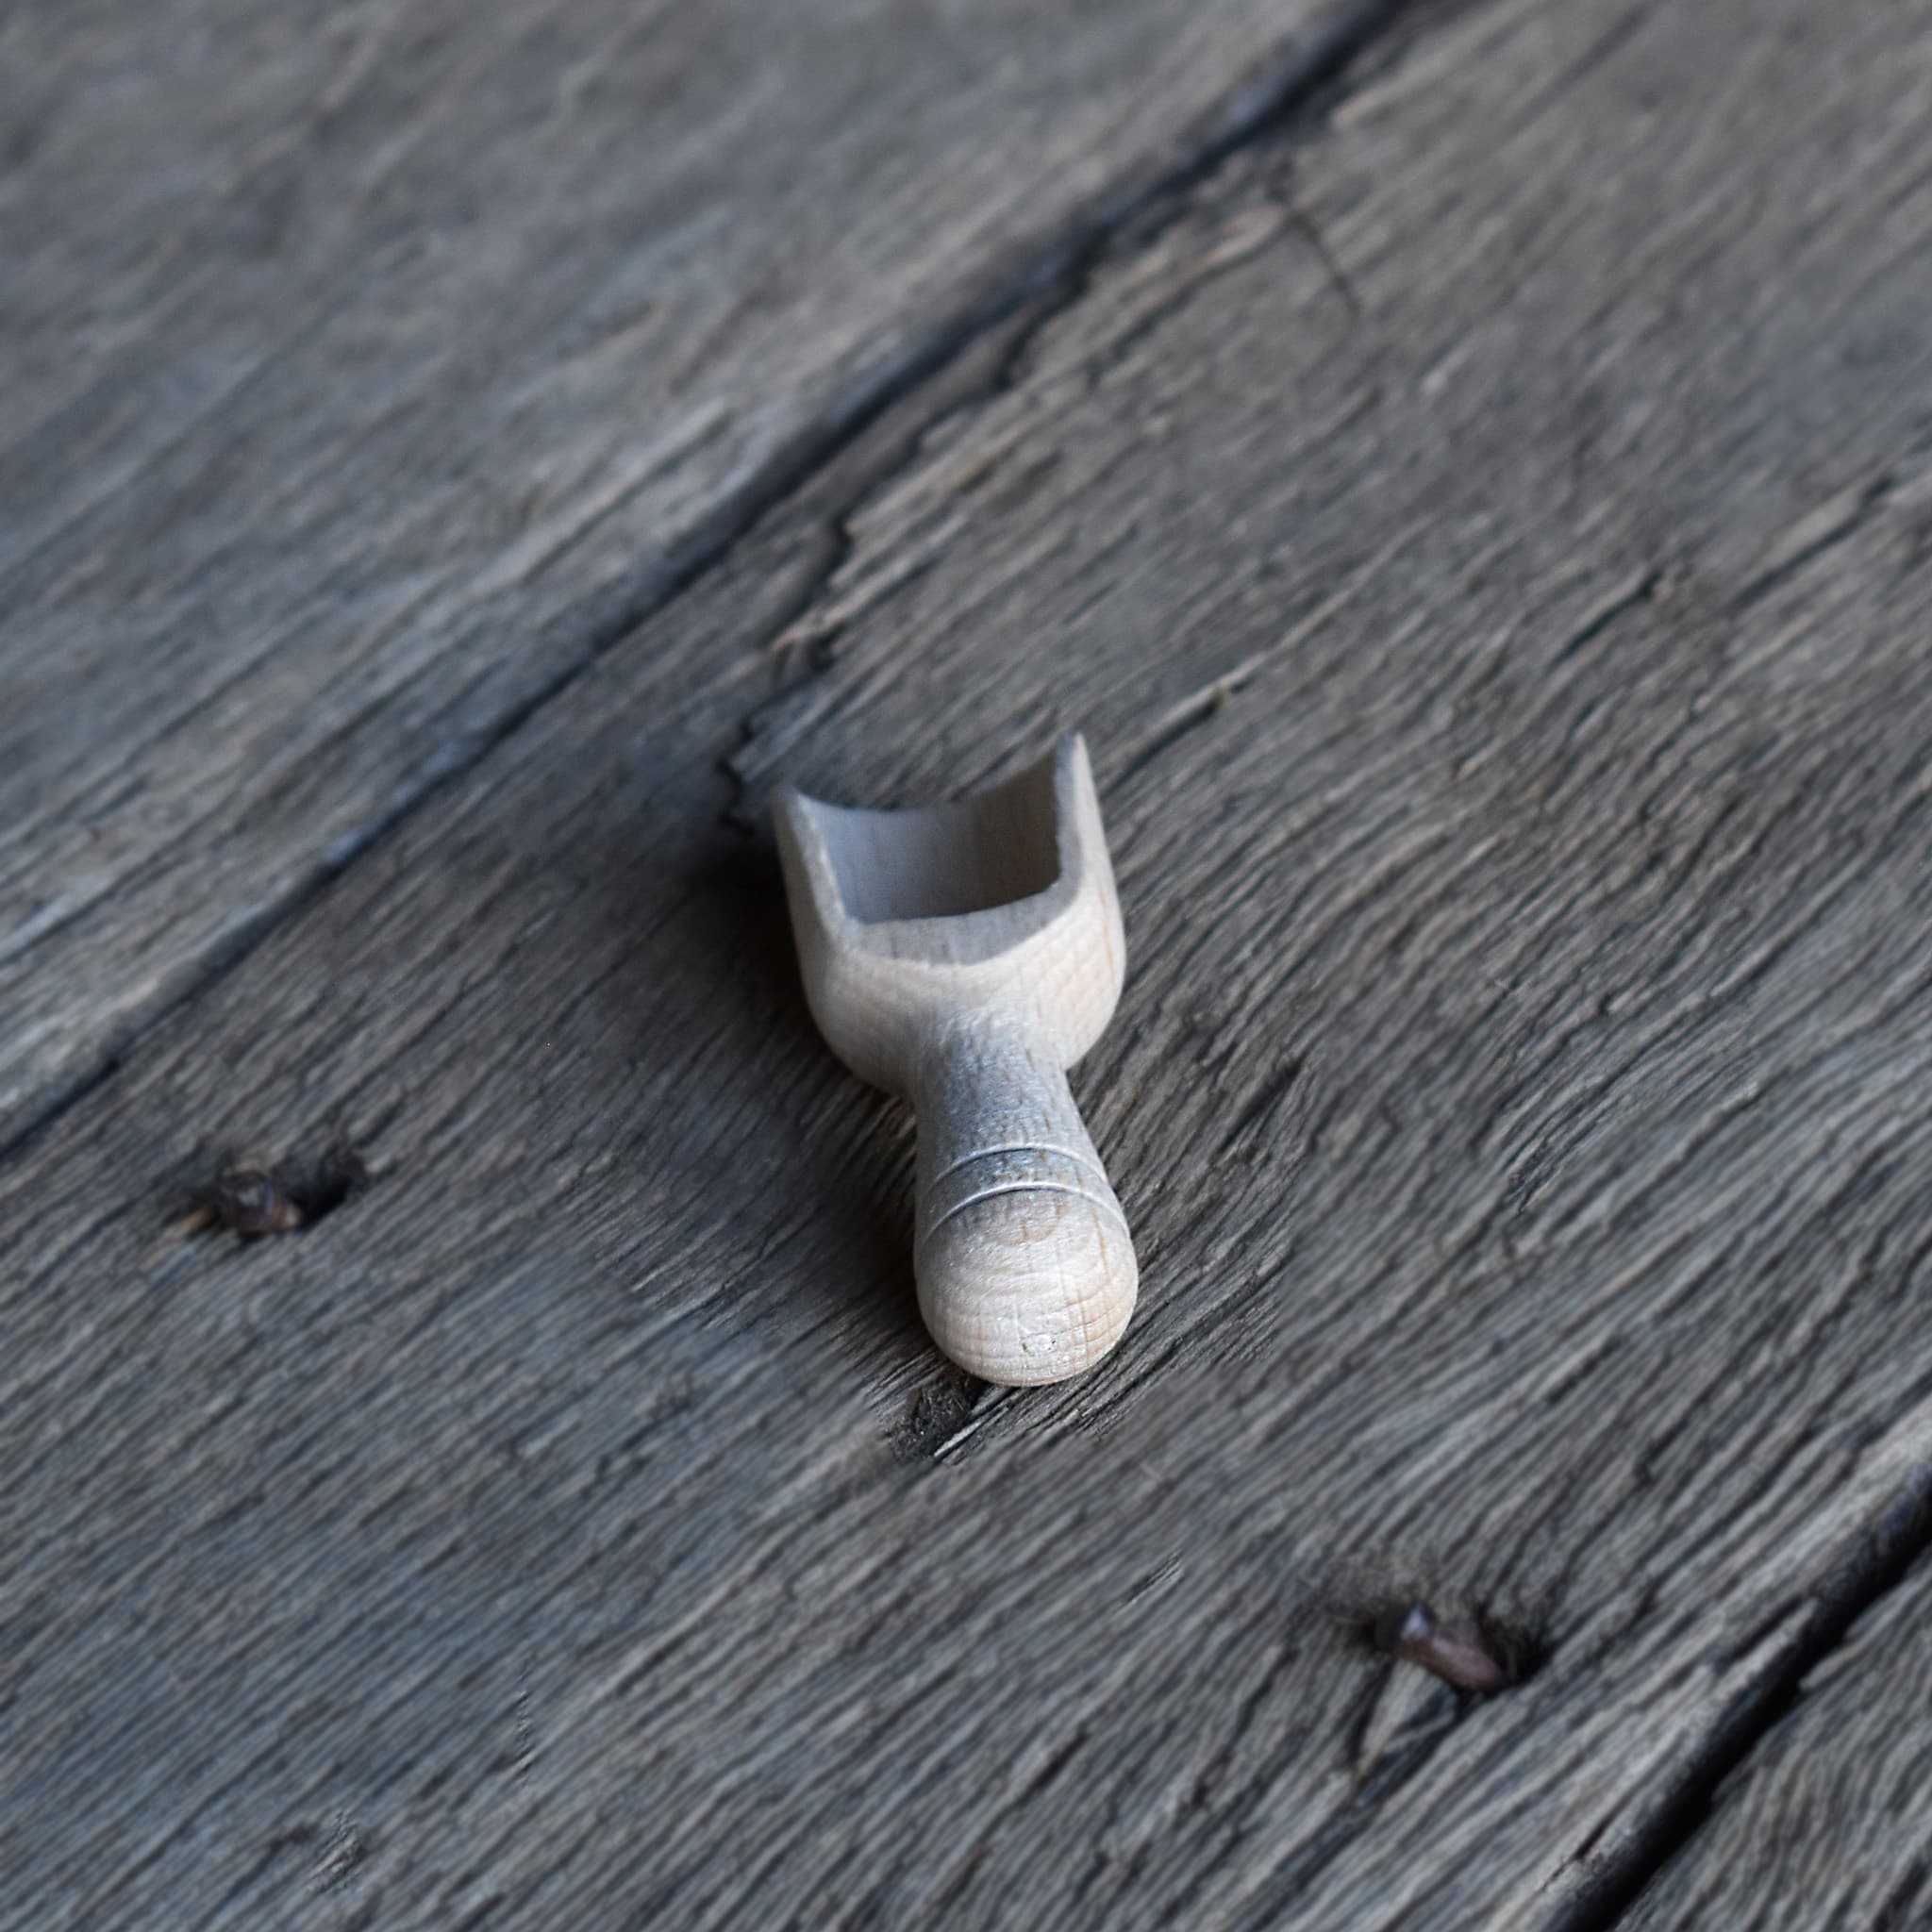 Redecker salt scoop. Made from beechwood timber. 100% natural and biodegradable. 